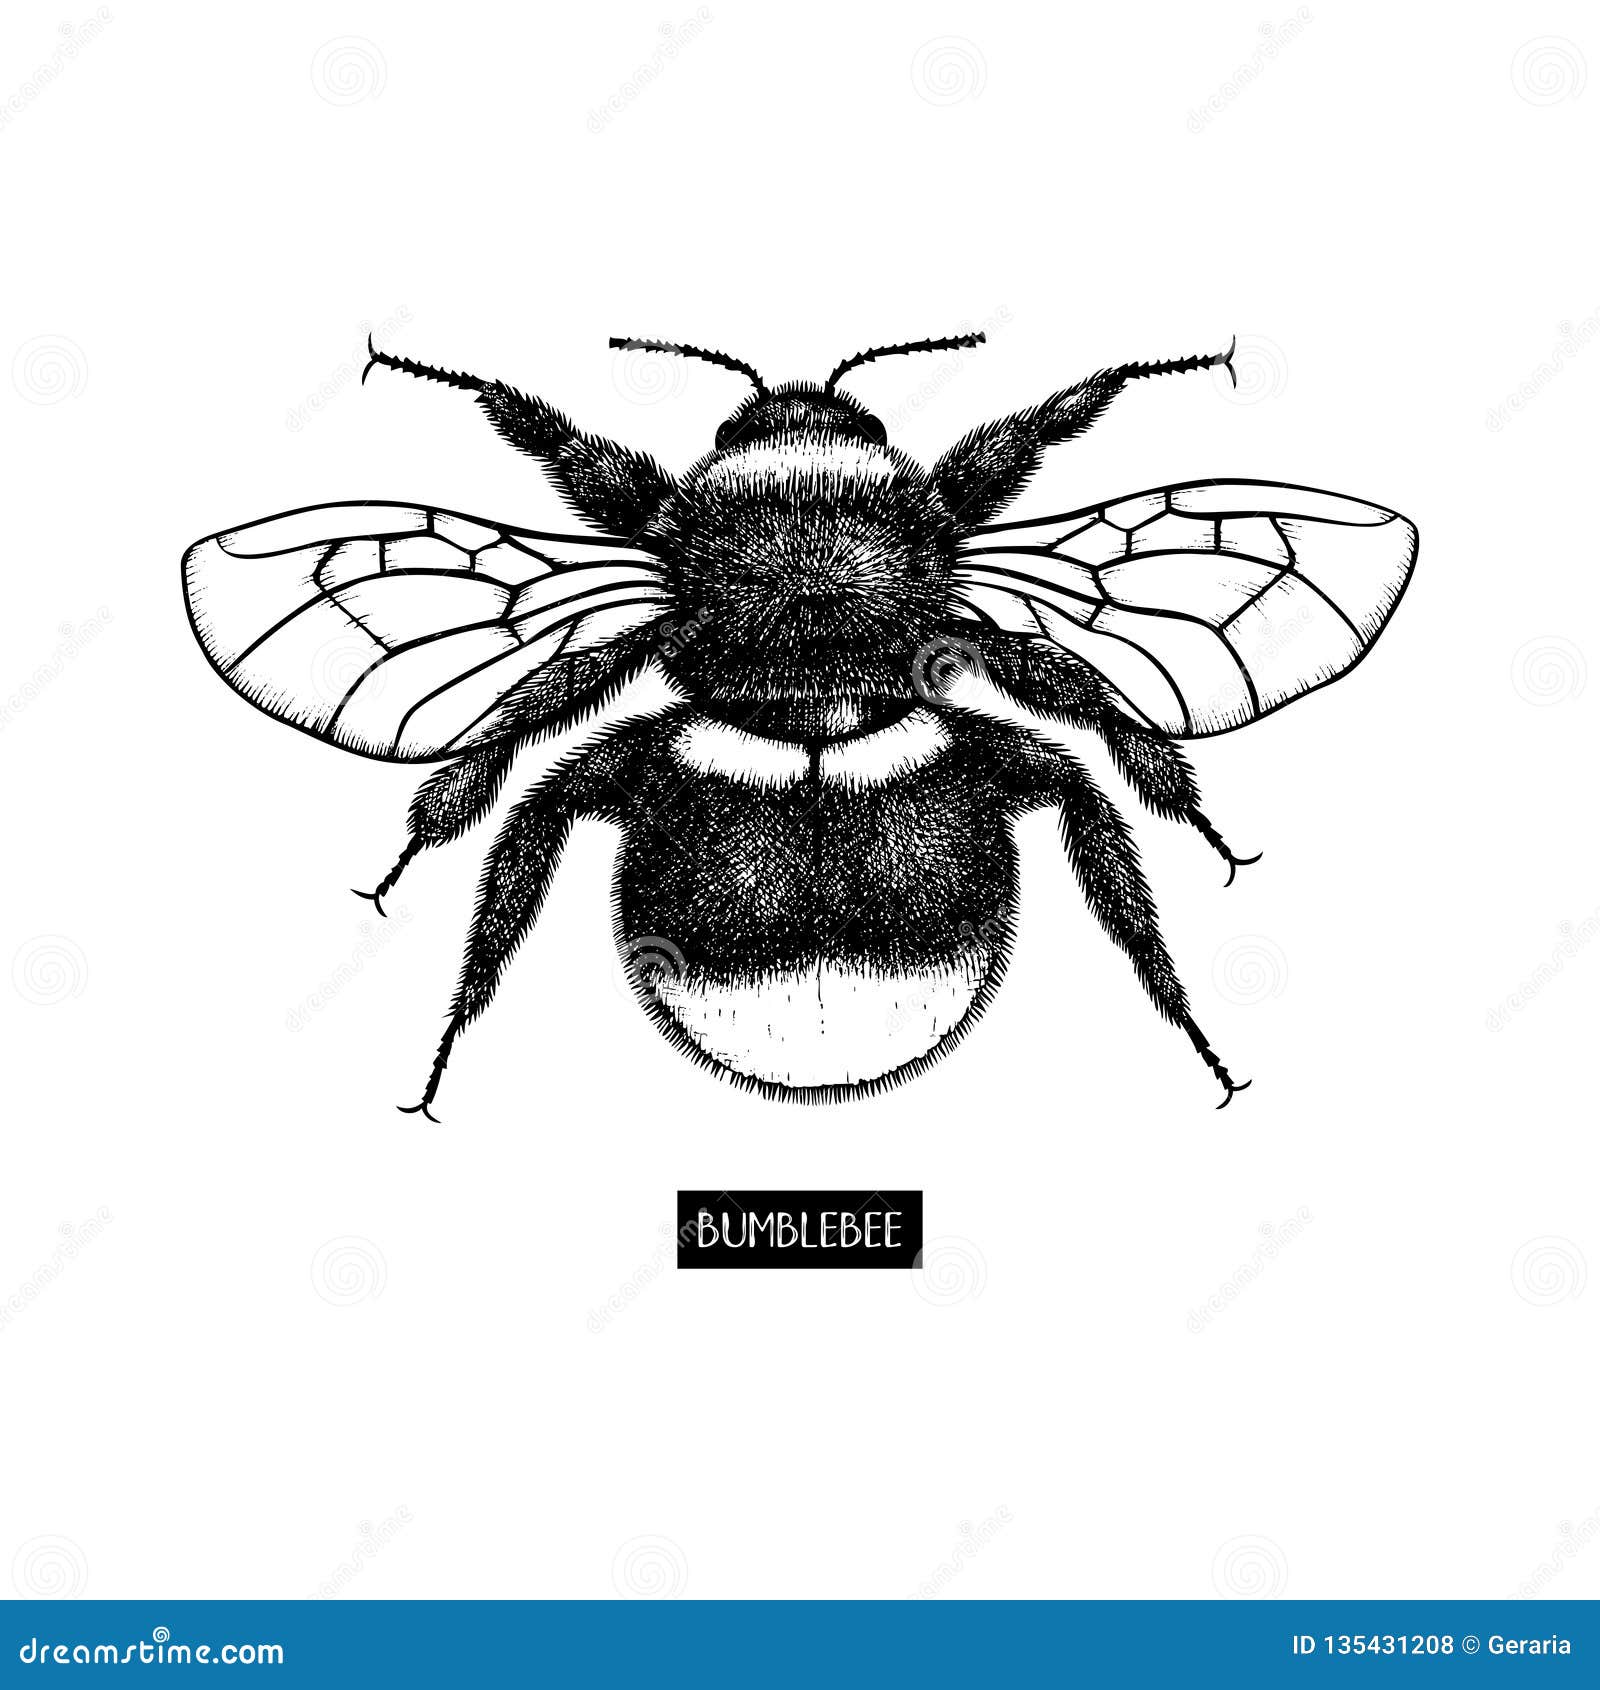  drawing of bumlebee. hand drawn insect sketch  on white. engraving style bumble bee s.